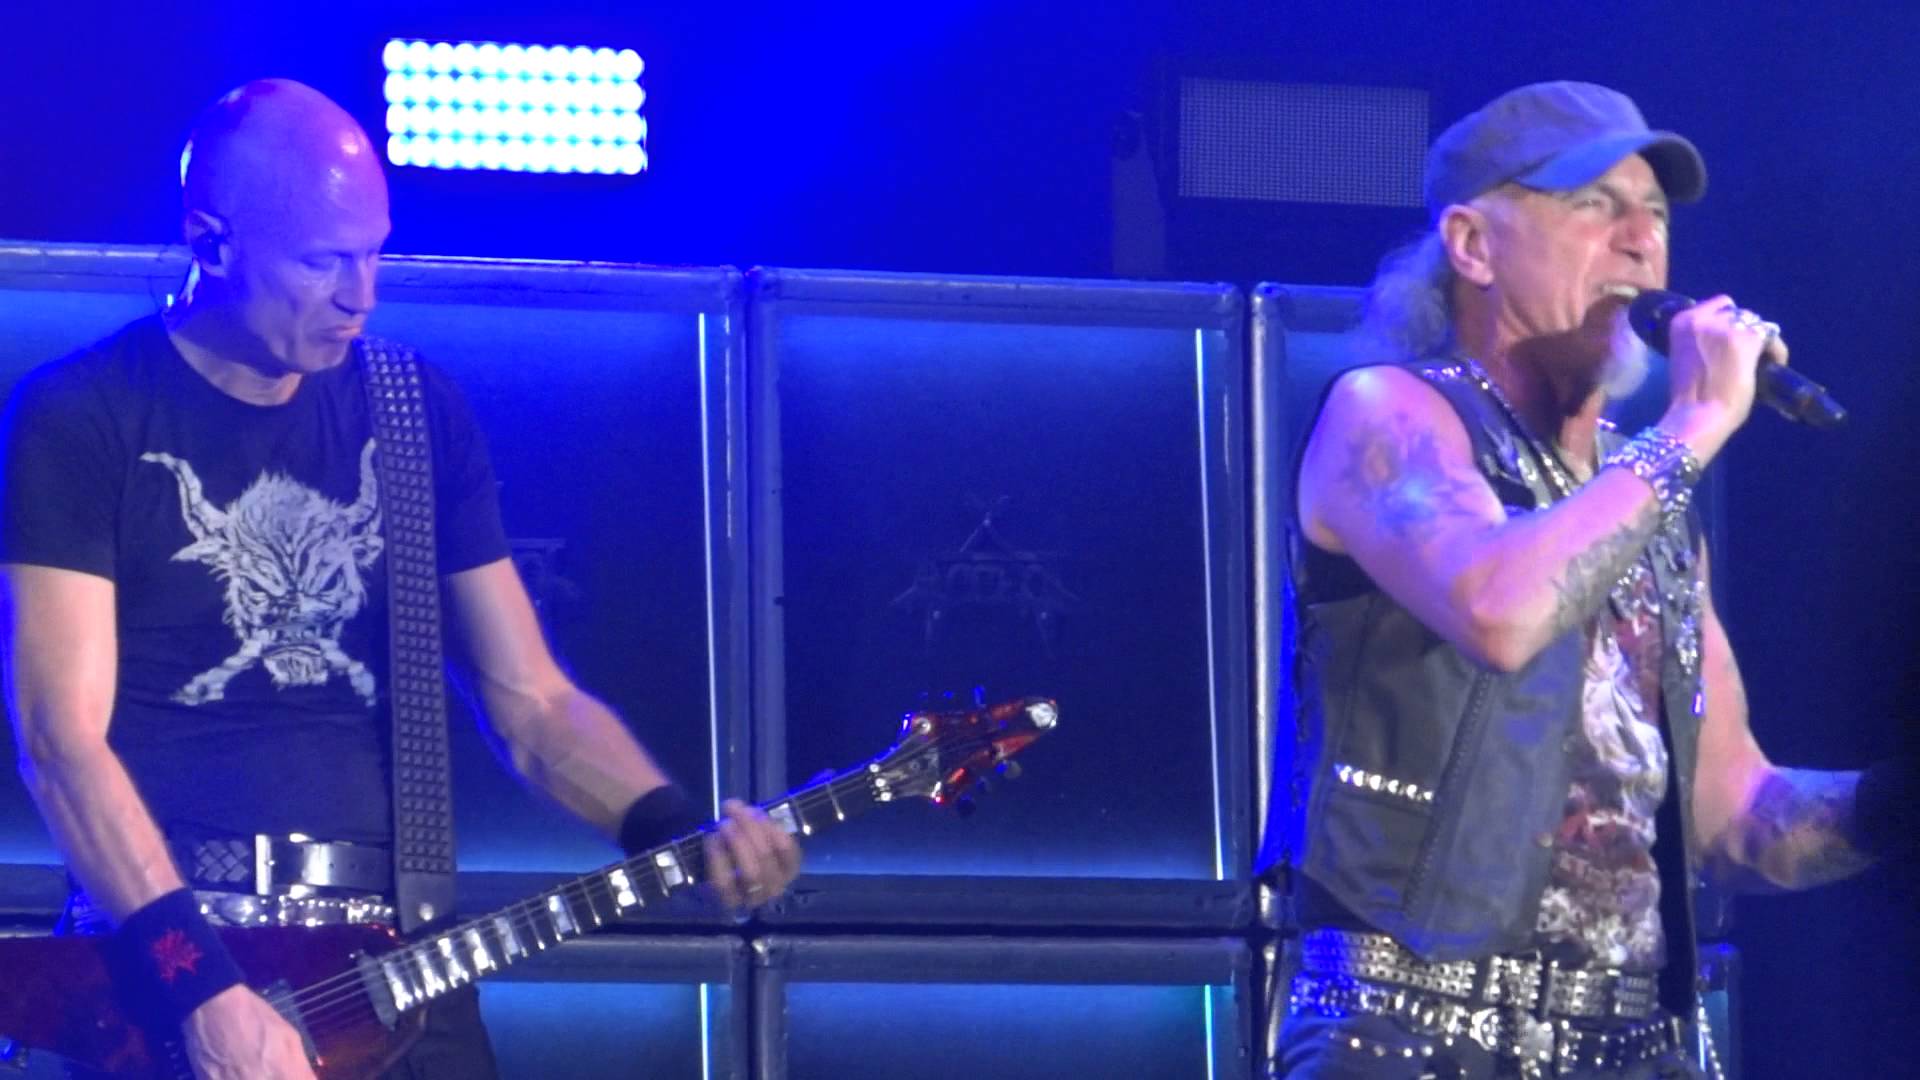 ACCEPT - shadow soldiers - Live at Metaldays 2015